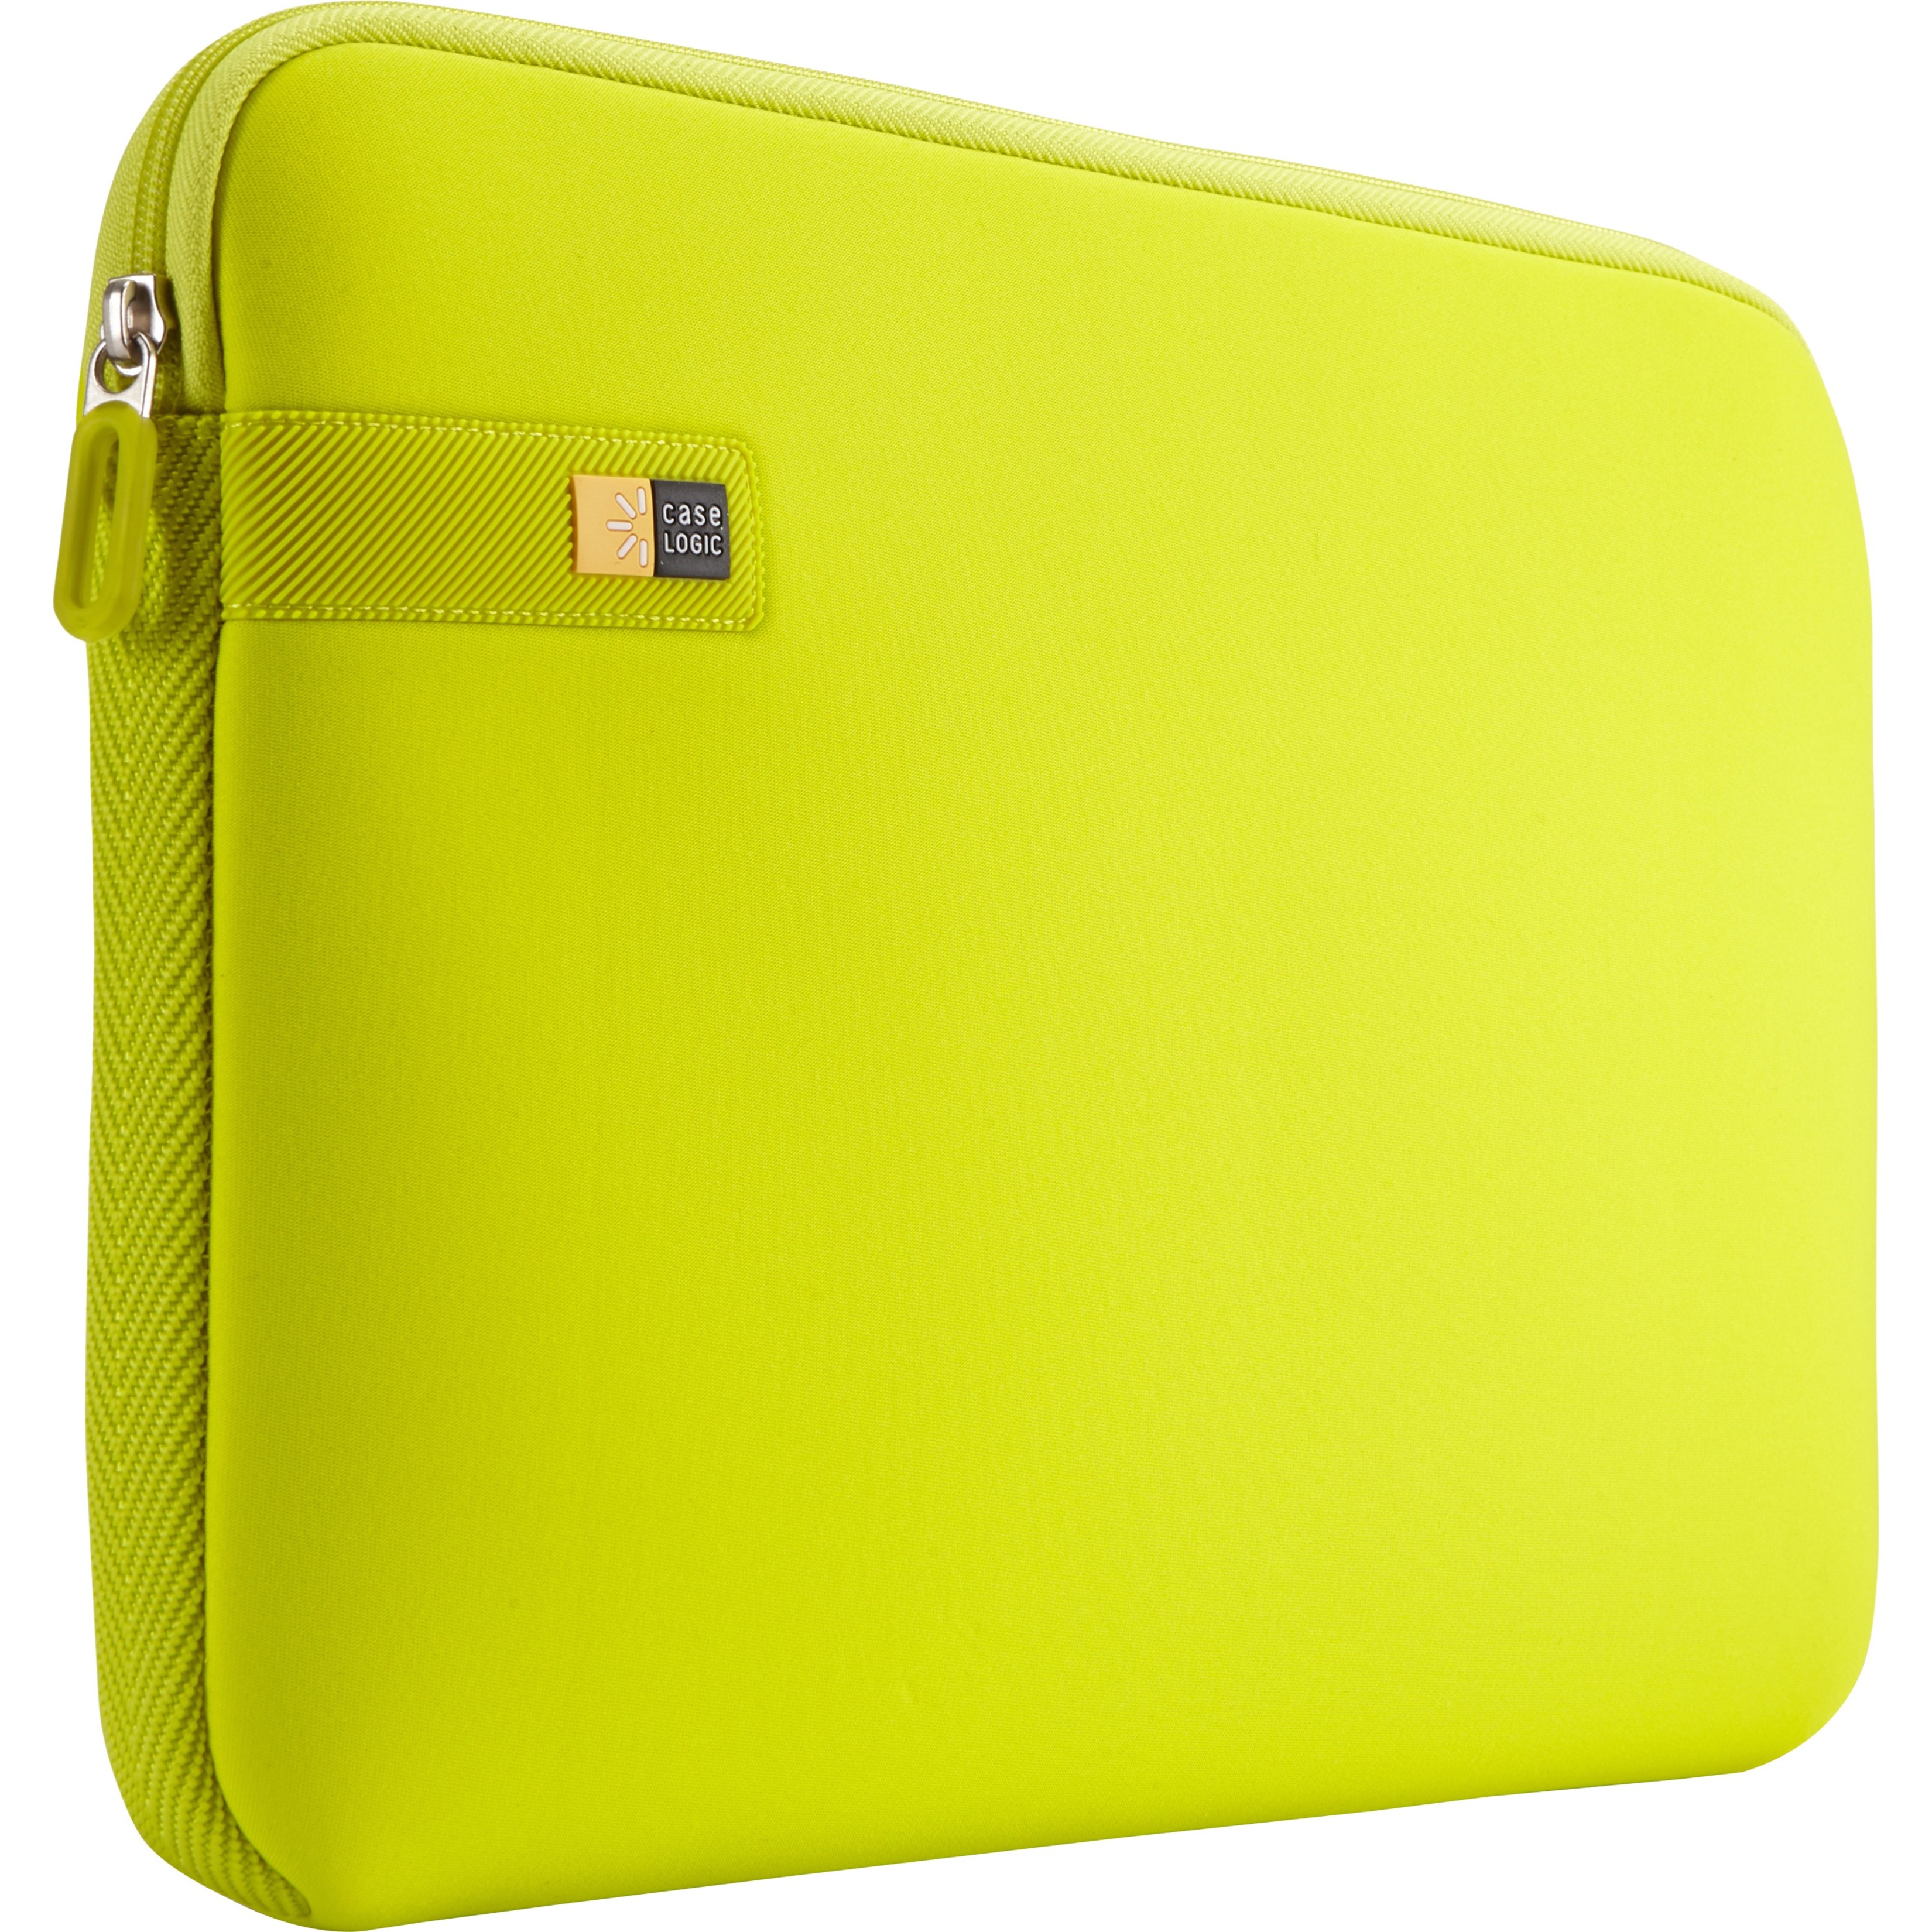 Case Logic LAPS-113 Carrying Case (Sleeve) for 13.3" MacBook Pro, Yellow - image 1 of 7